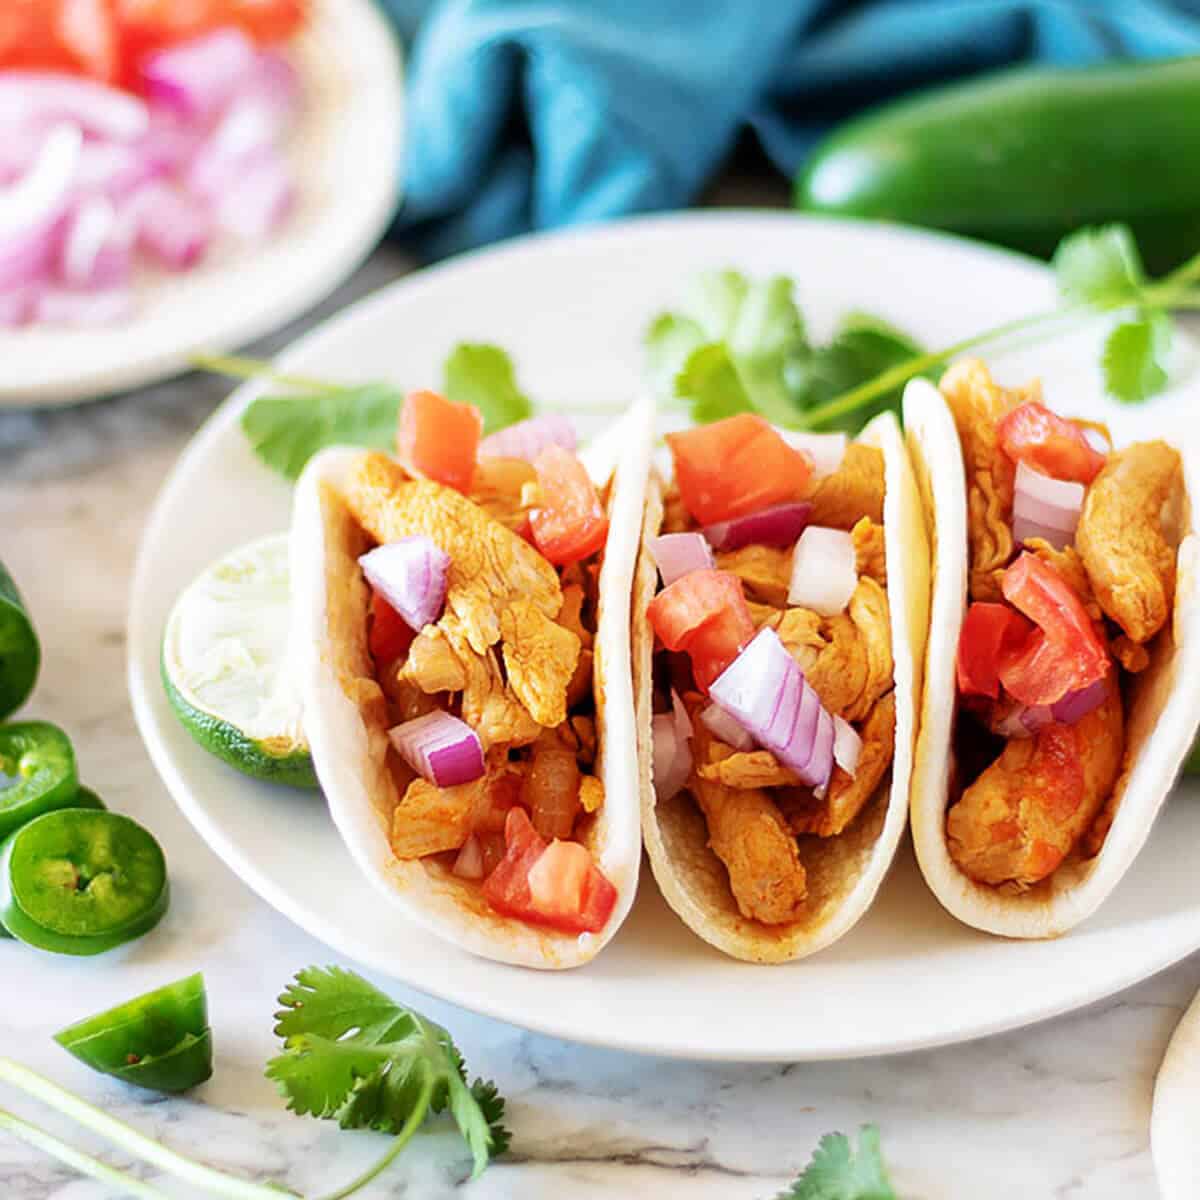 Three Instant Pot street tacos with chicken filling and diced onions.